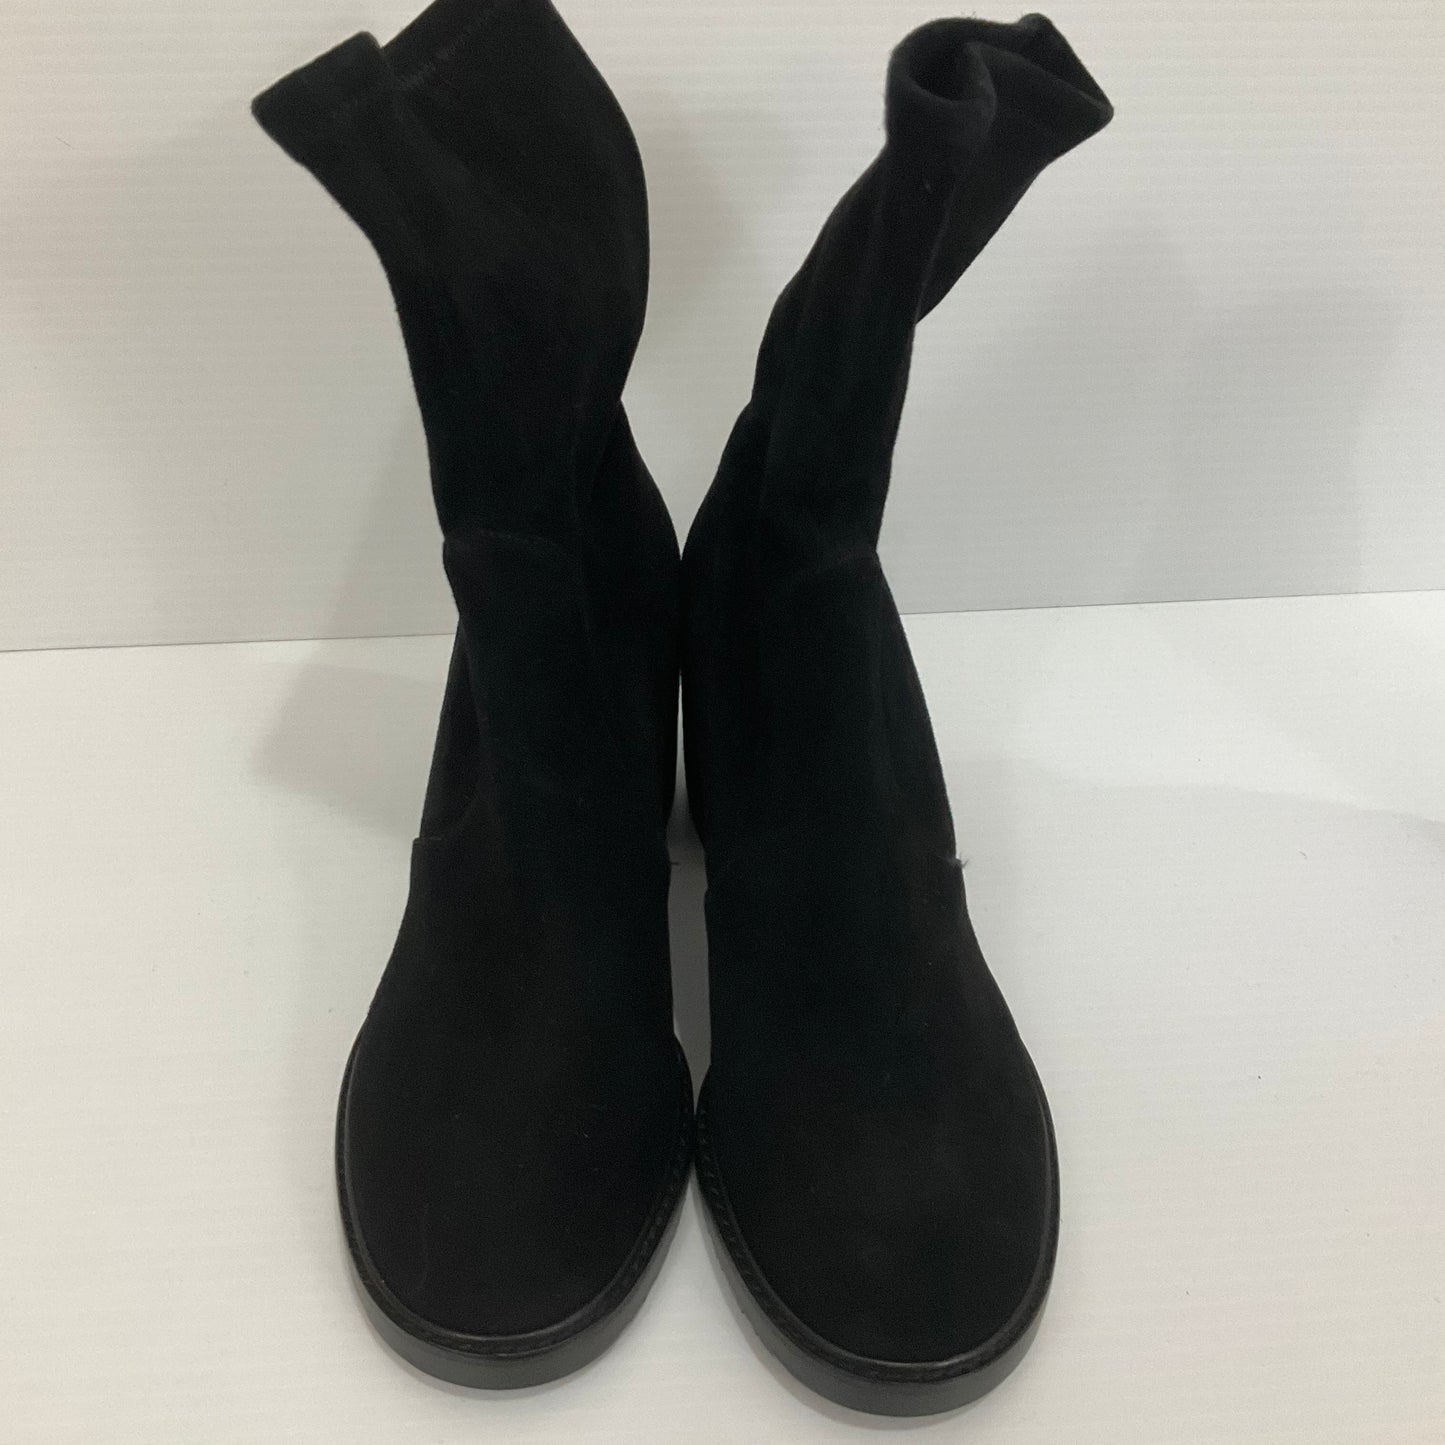 Boots Ankle Heels By Stuart Weitzman  Size: 8